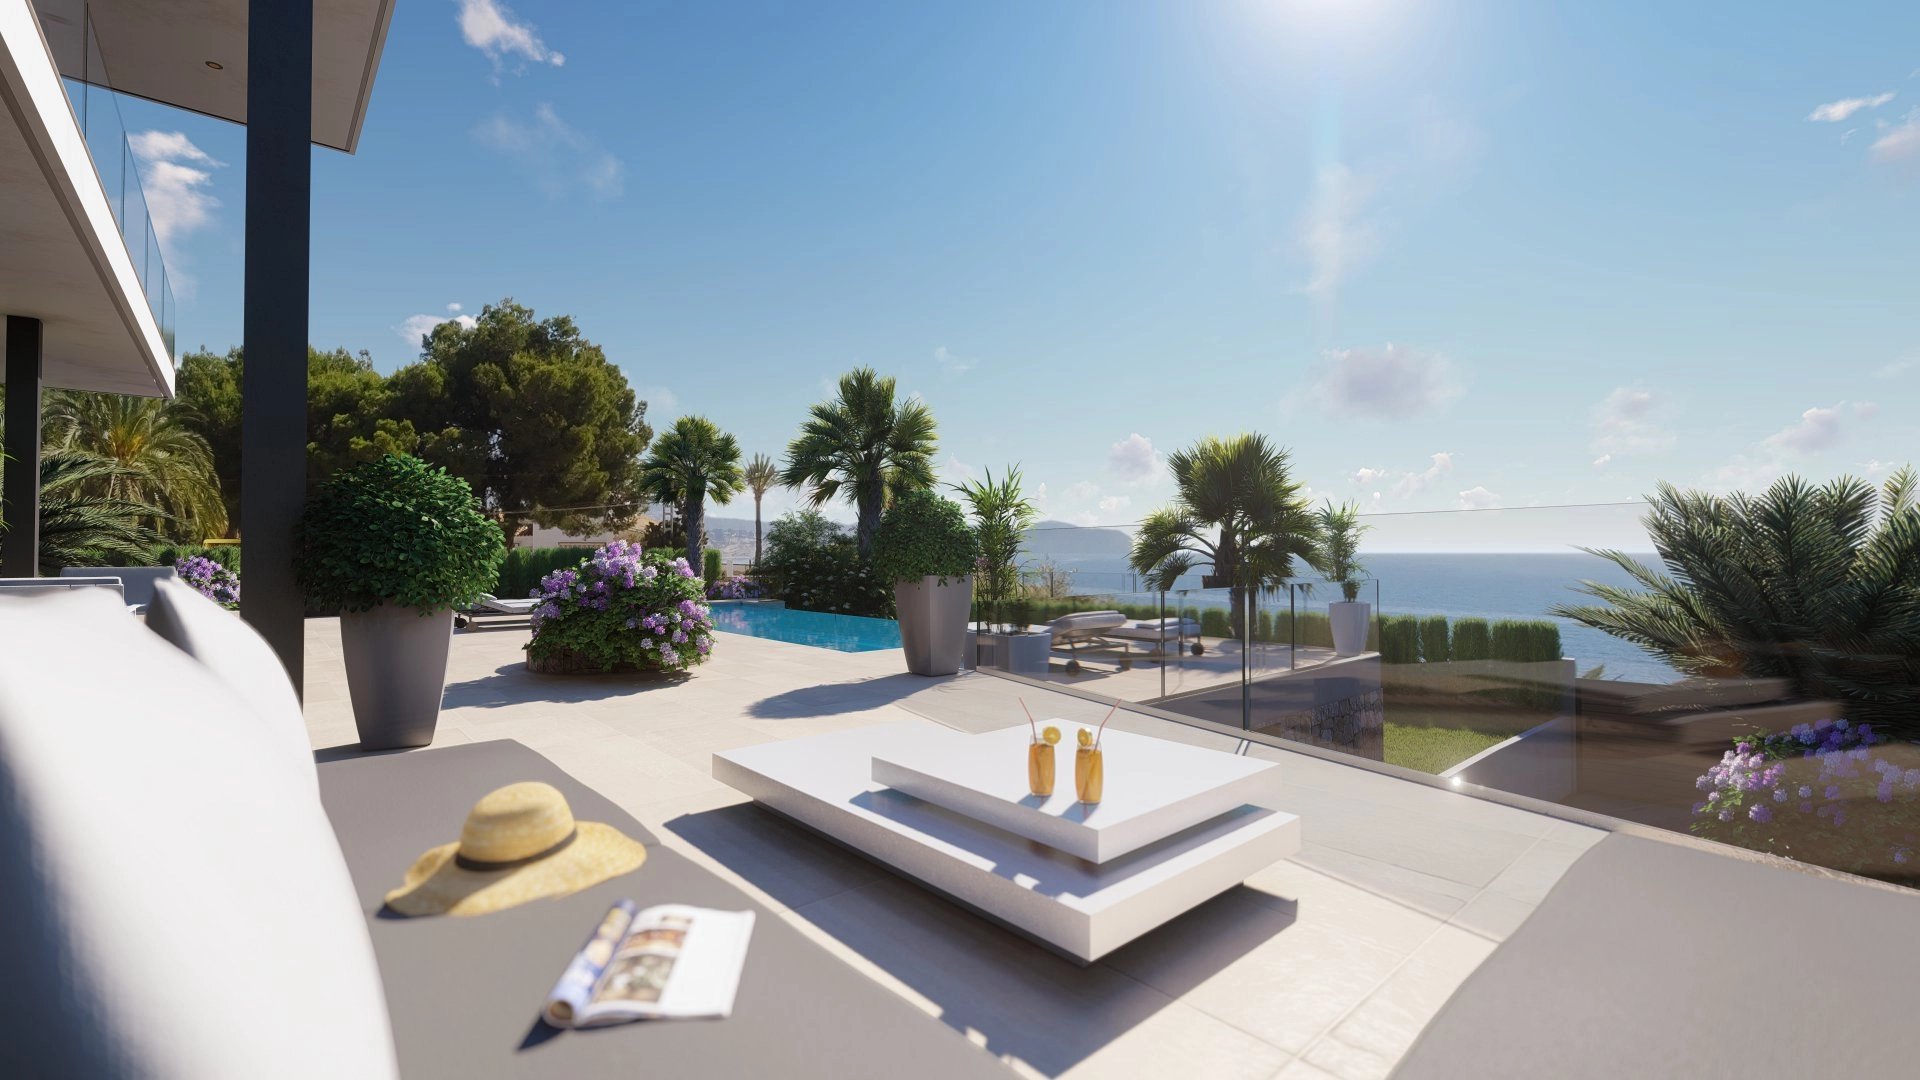 A new luxury house in Calpe close to sea and amenities